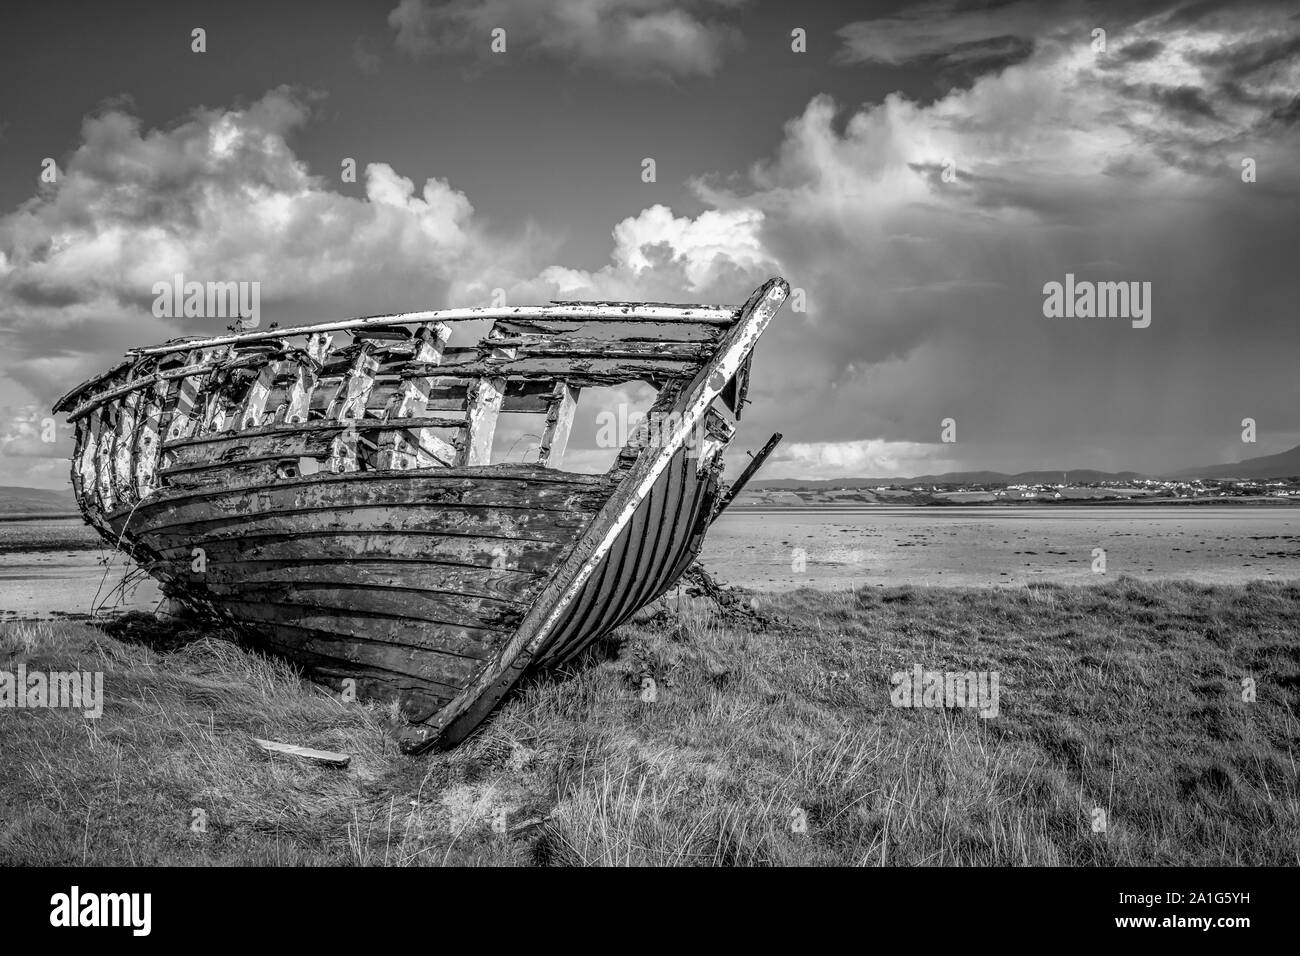 An old wooden Fishing boat decaying on a beach in Donegal Ireland Stock Photo